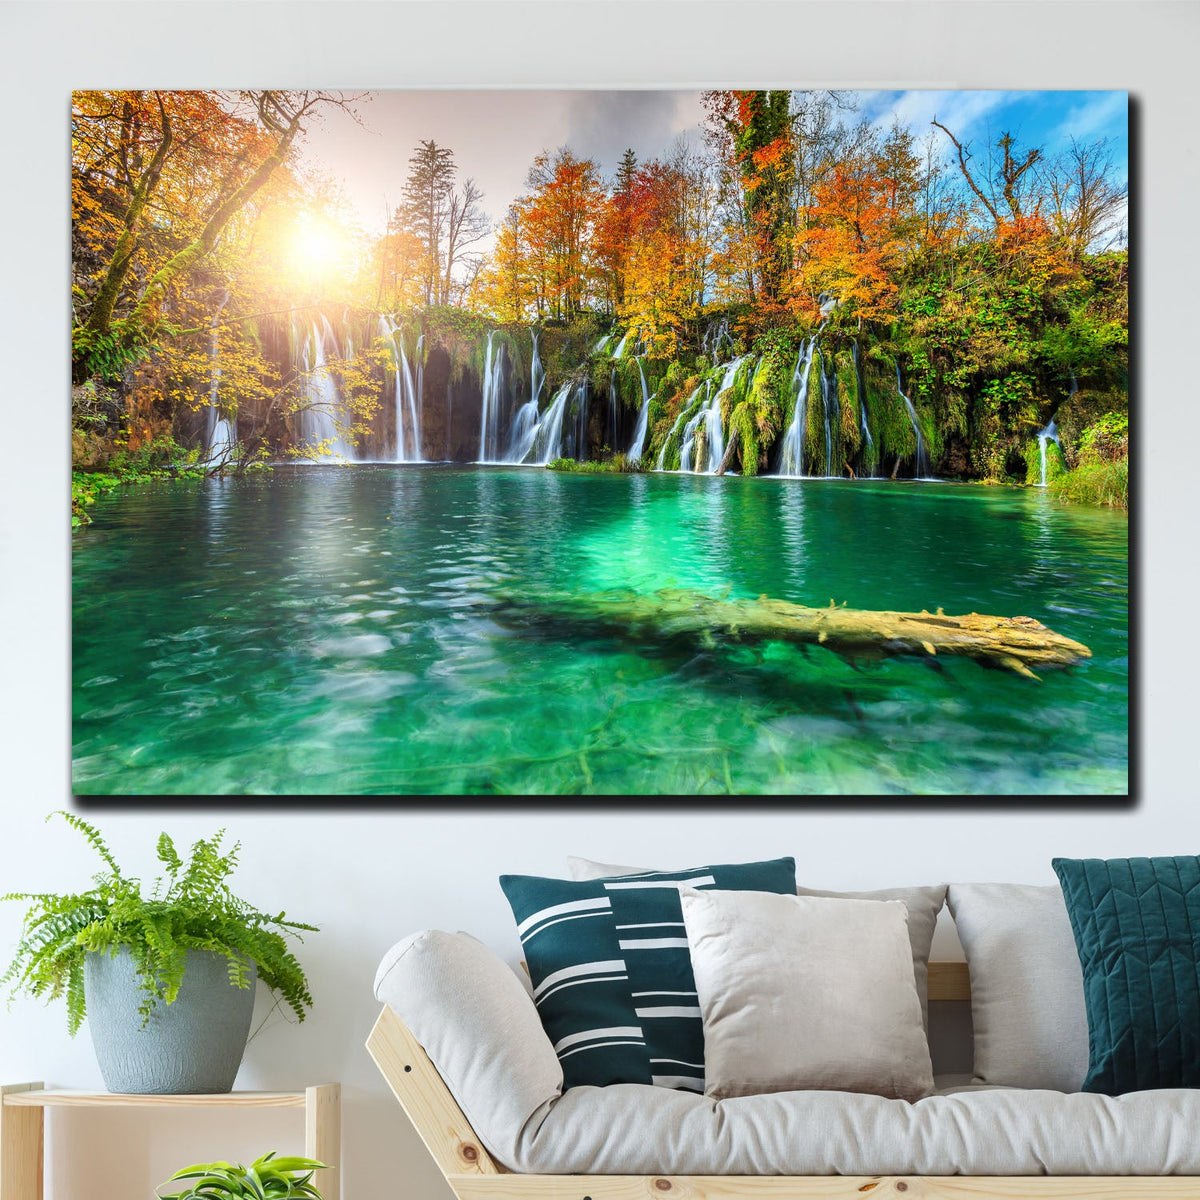 https://cdn.shopify.com/s/files/1/0387/9986/8044/products/CroatianAutumnCanvasArtprintStretched-3.jpg